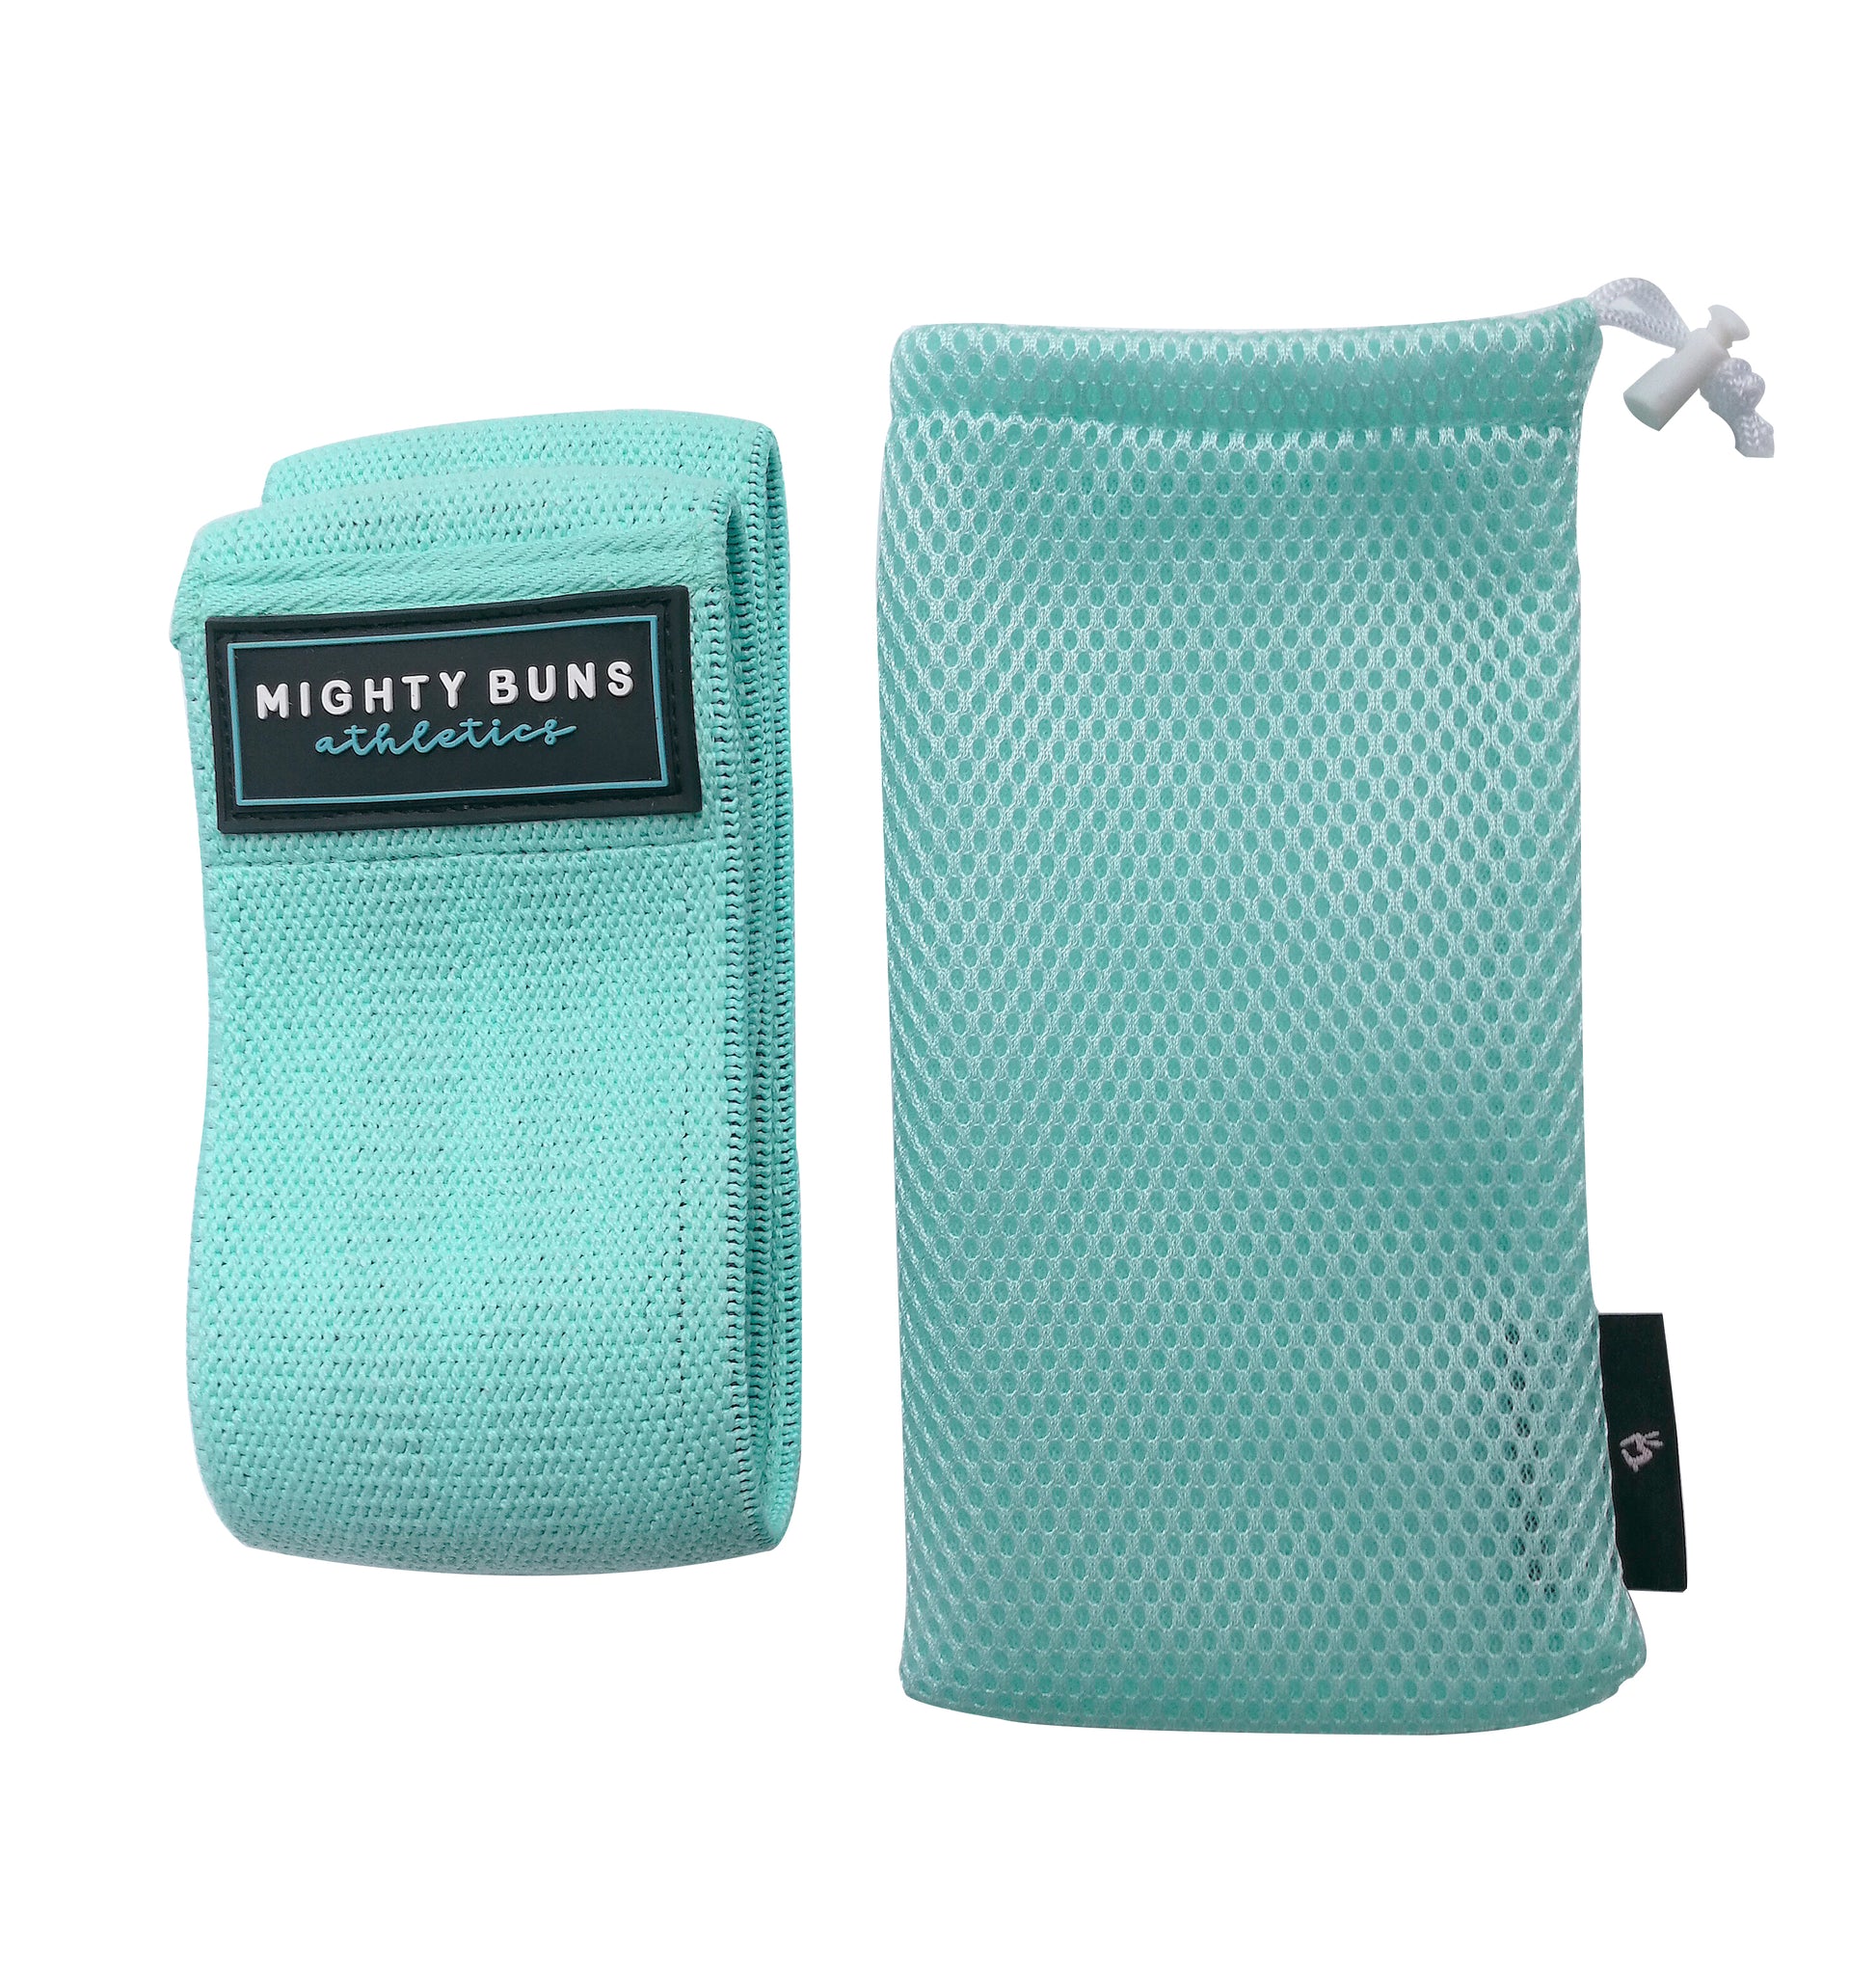 mint blue heavy duty resistance band, cotton and polyester, rubber threads and logo design, 200 lb heavy-duty resistance band, free mint mesh bag, squat, booty band, one size, mint green, mighty buns